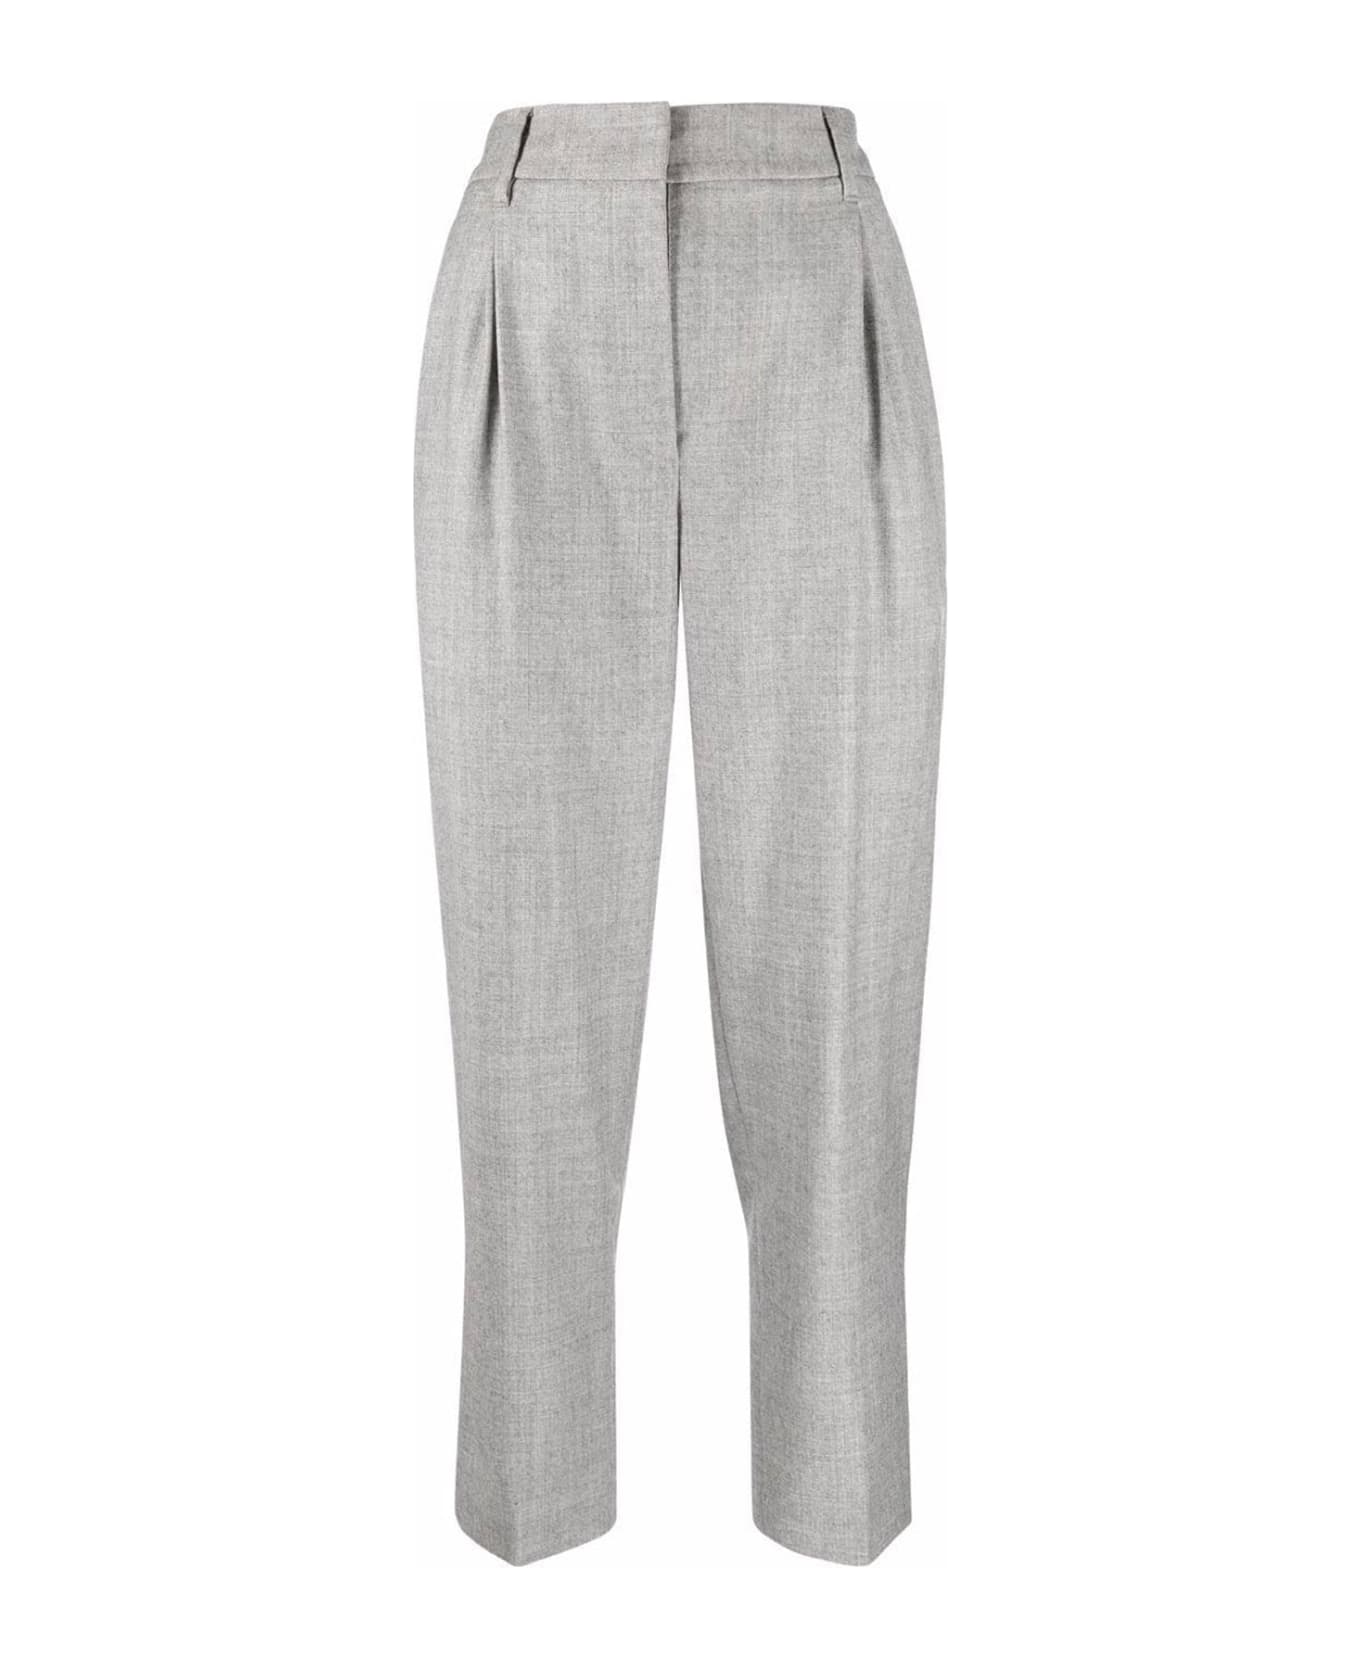 Brunello Cucinelli Cropped Pants - Gray